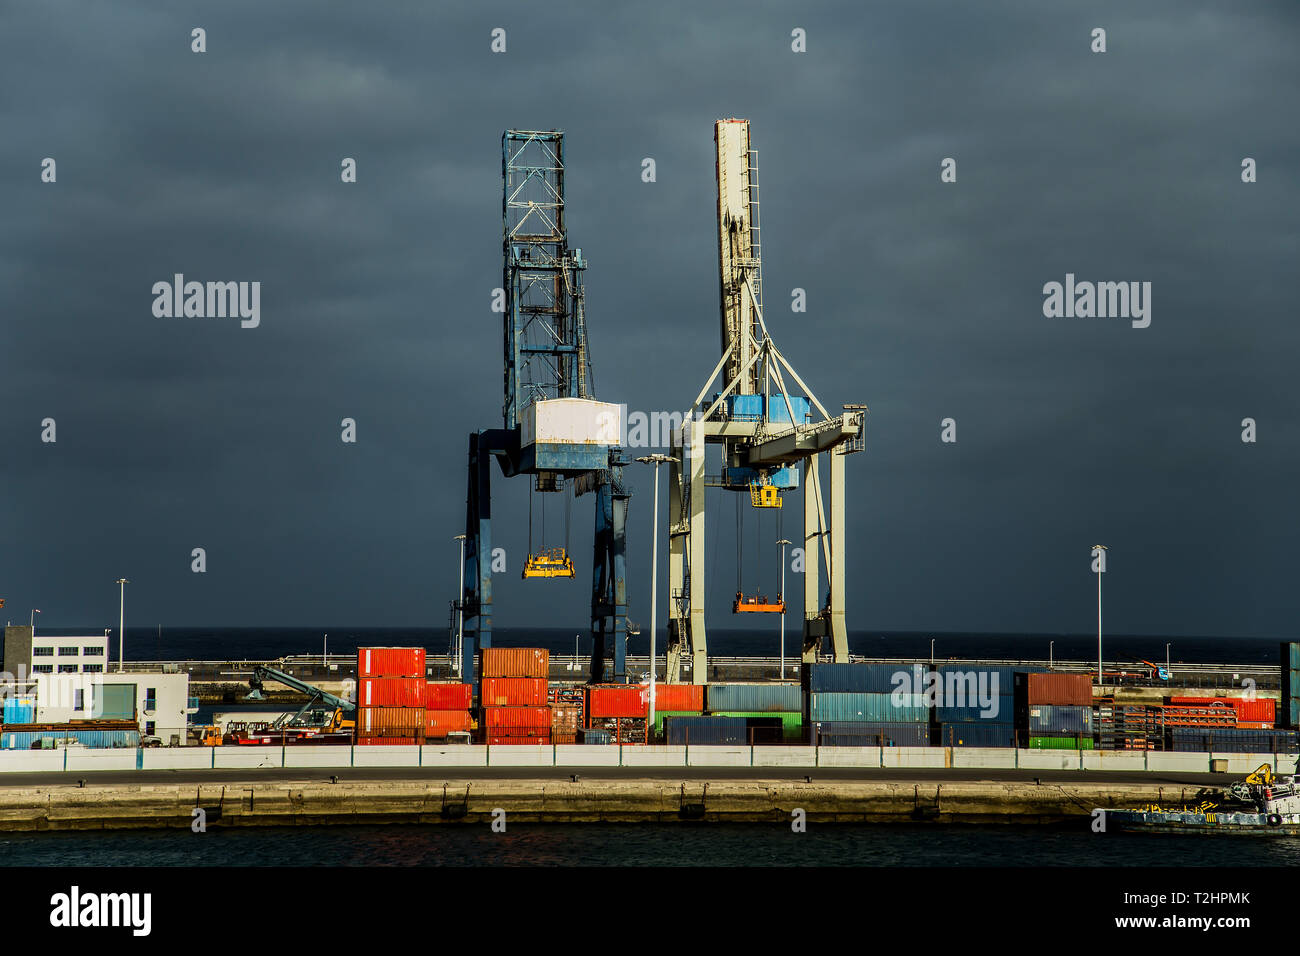 cranes and colored containers in the port of ocean. the sky is grey. Stock Photo